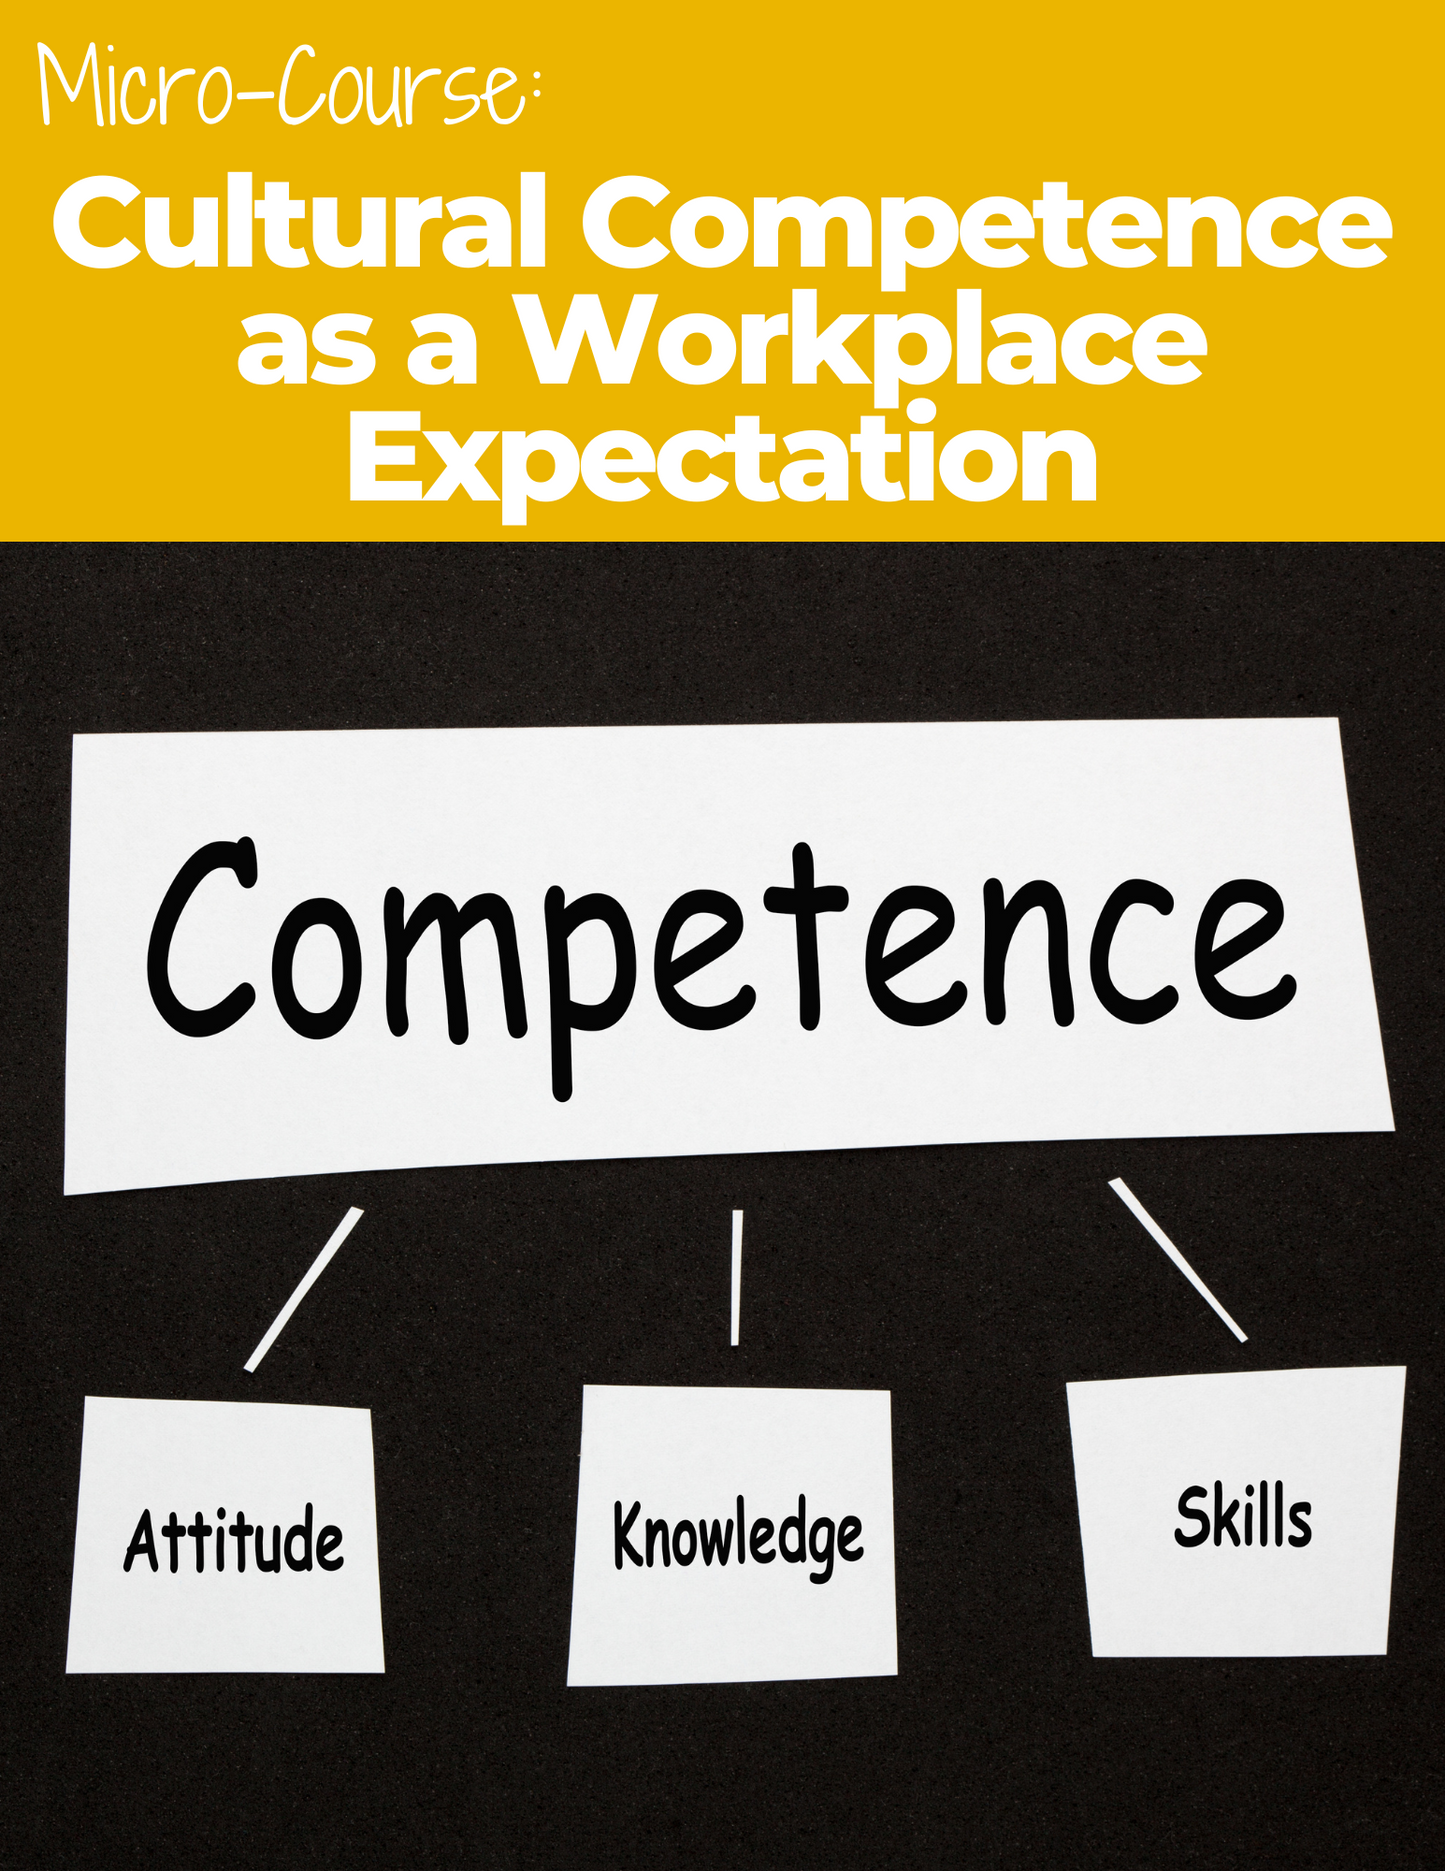 Cultural Competence as a Workplace Expectation